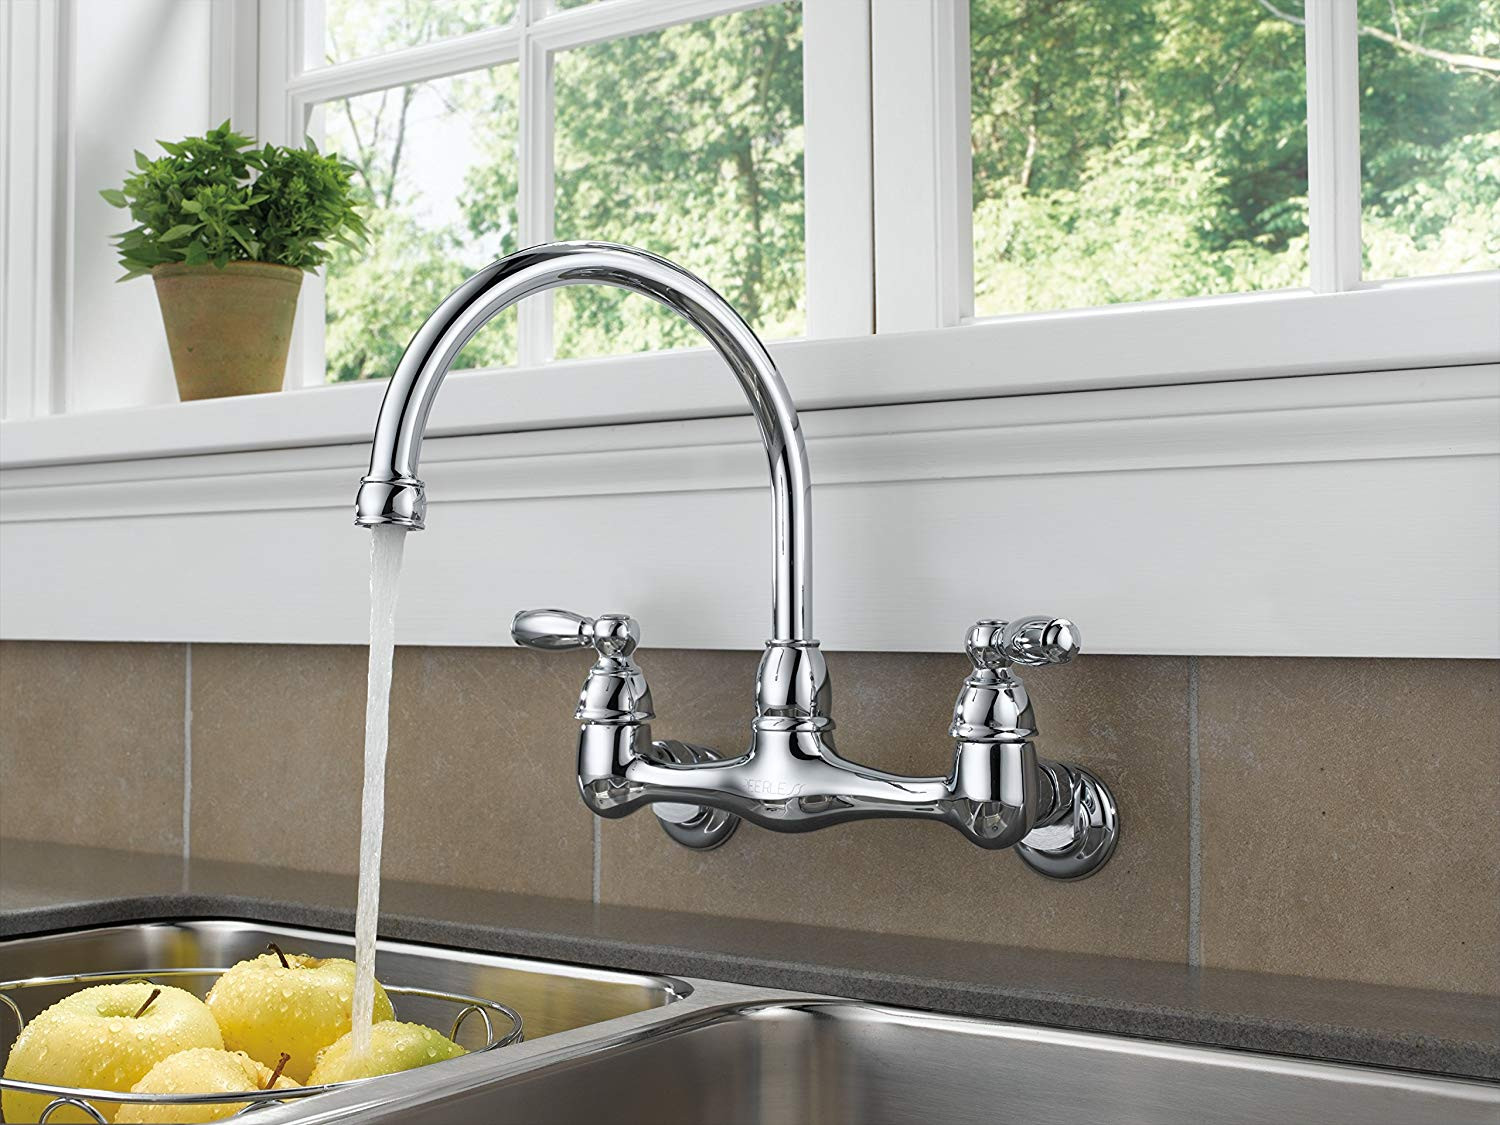 Wall Mount Kitchen Sinks
 Top 10 Best Wall Mount Kitchen Faucets in 2020 Reviews